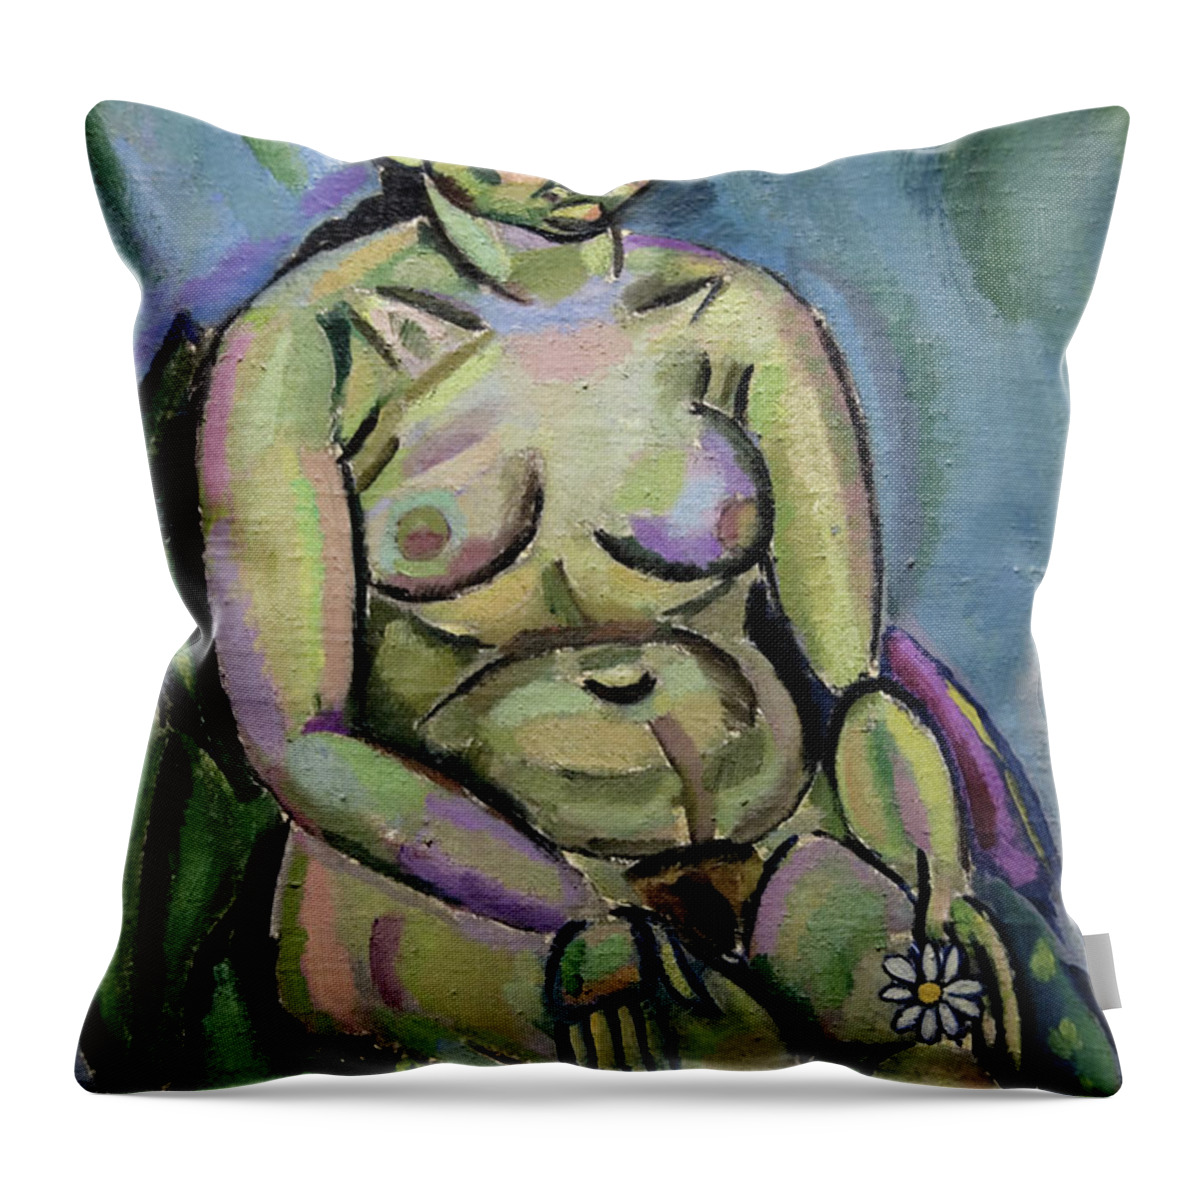 Nude Throw Pillow featuring the painting Nude with a Flower by Joan Mir i Ferr